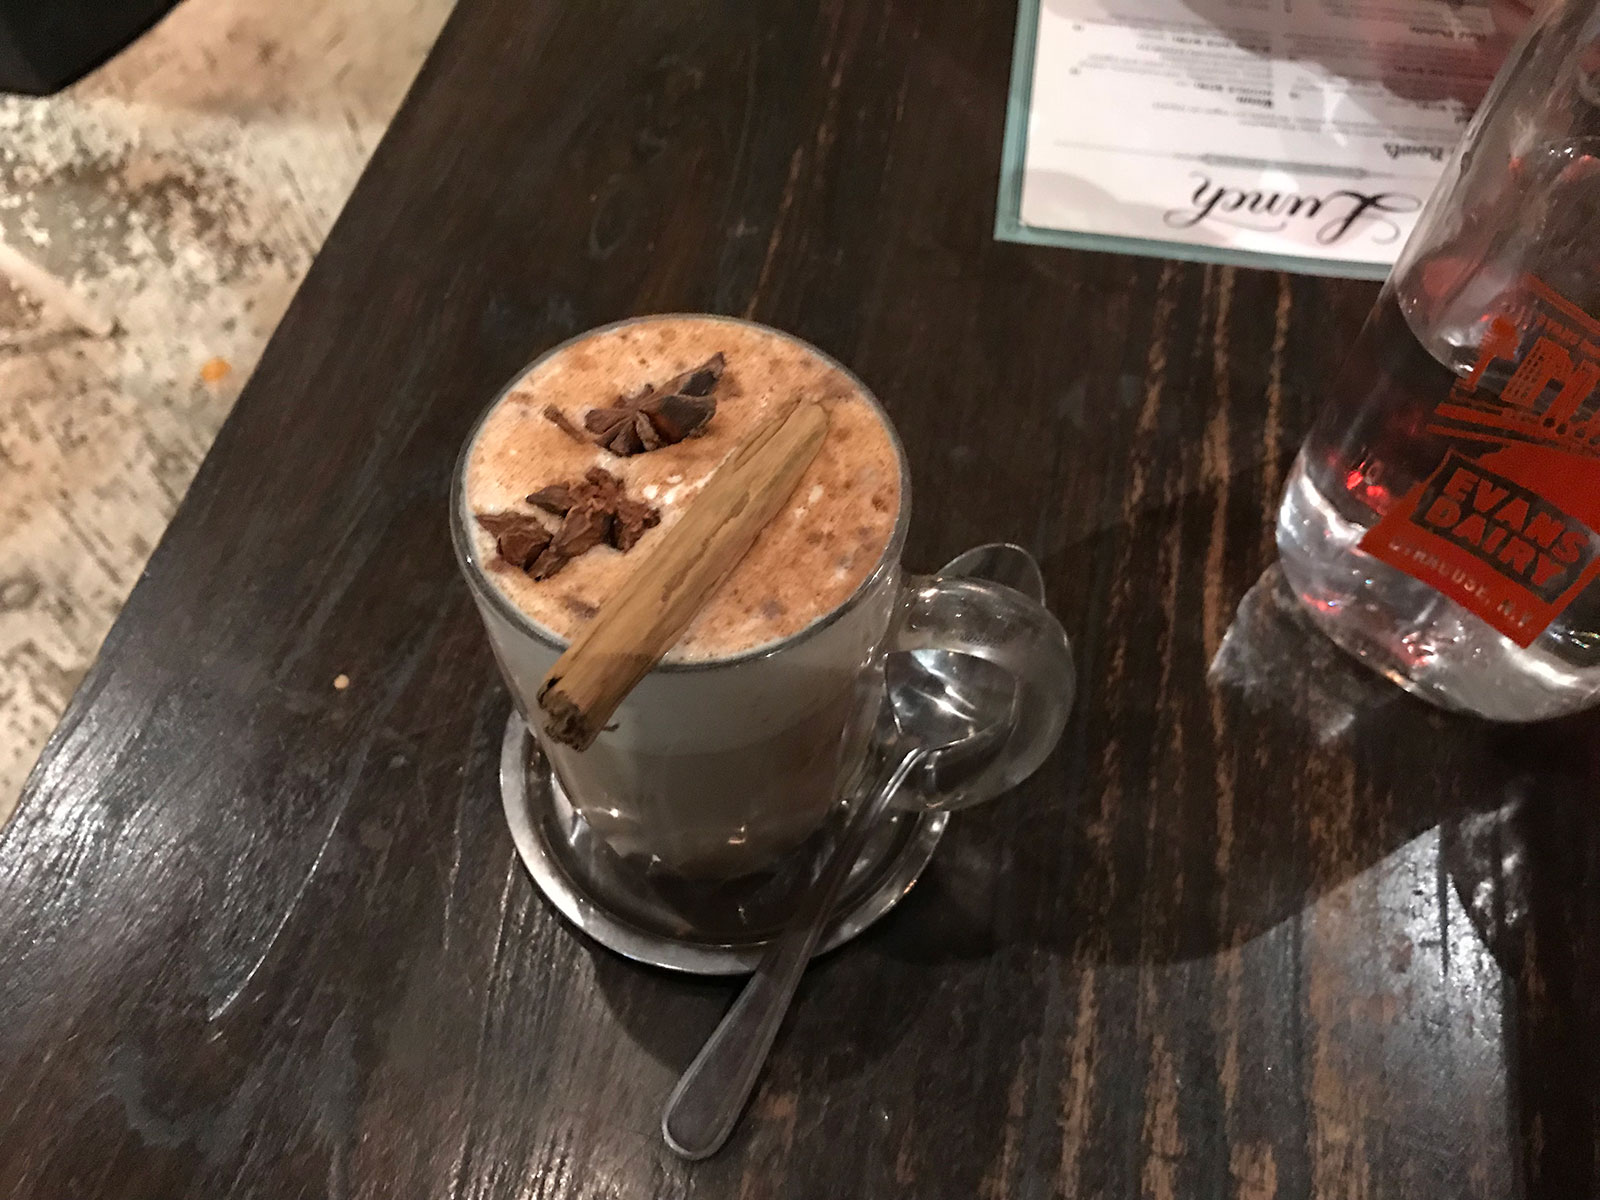 A glass with a handle, filled with a foamy drink, sitting on a table, and a silver spoon through the handle of the glass. The drink has a cinnamon stick and a few pieces of star anise floating in it.